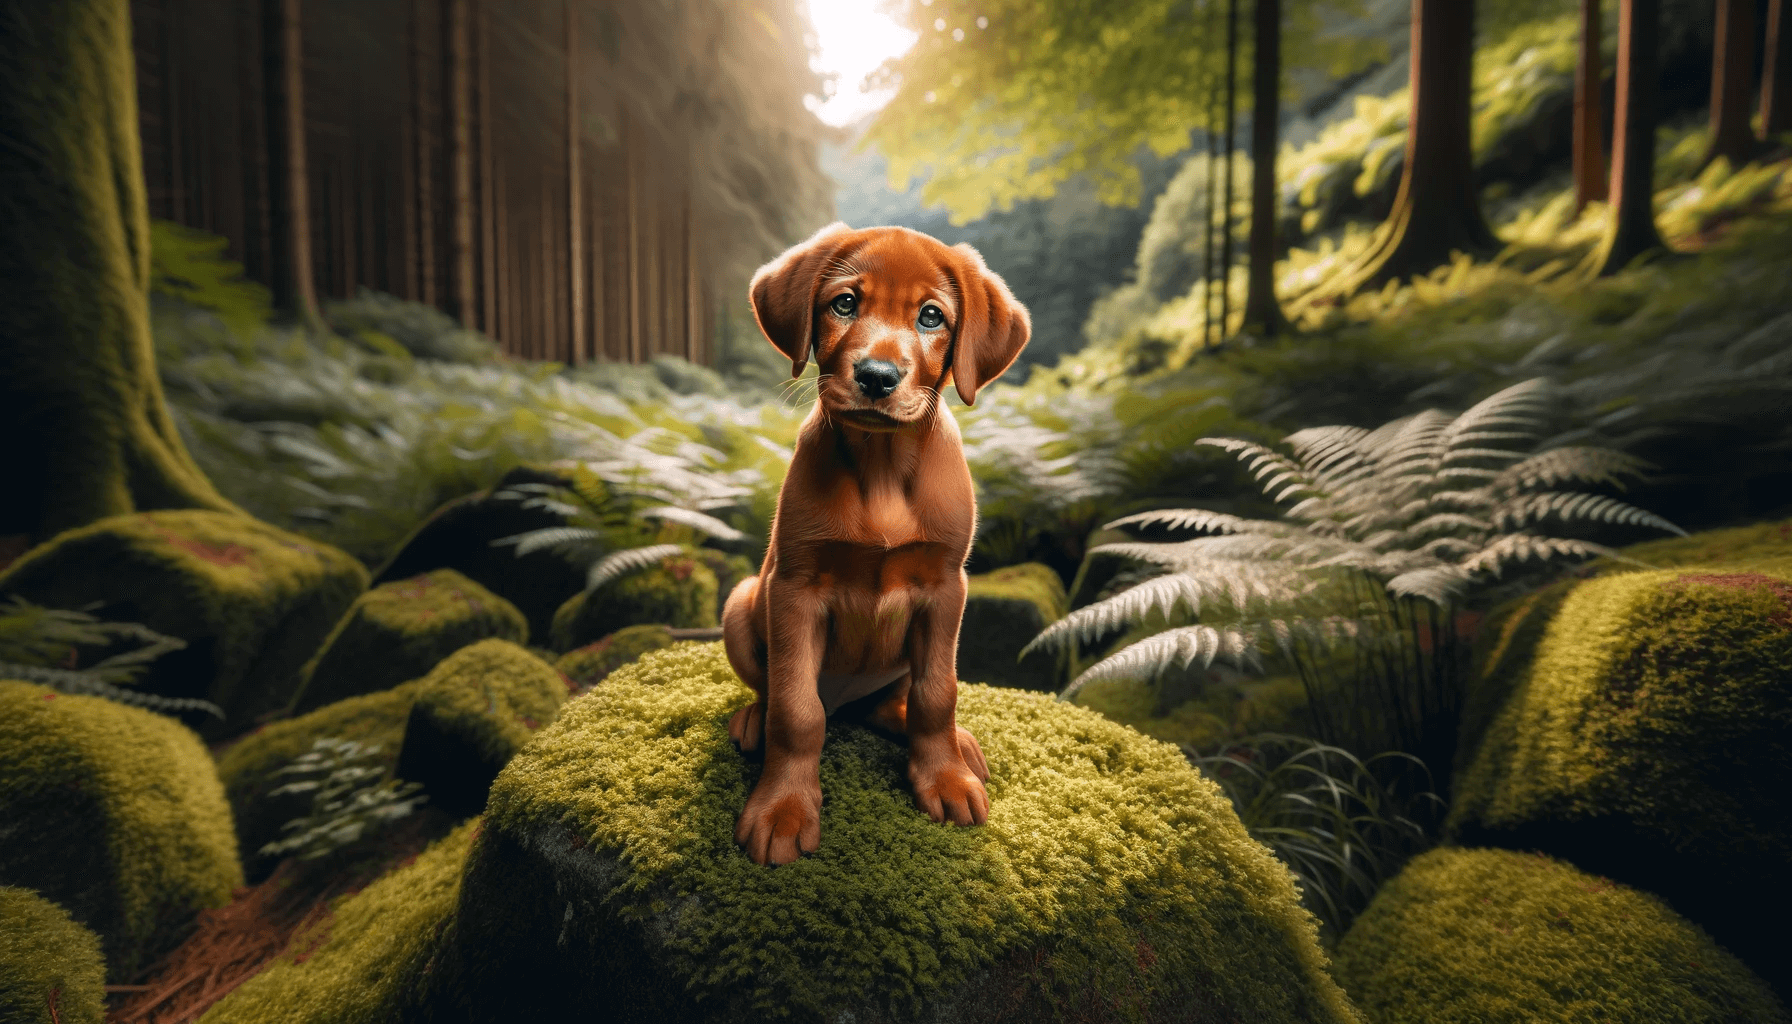 Red Fox Lab puppy with a lustrous copper-red coat